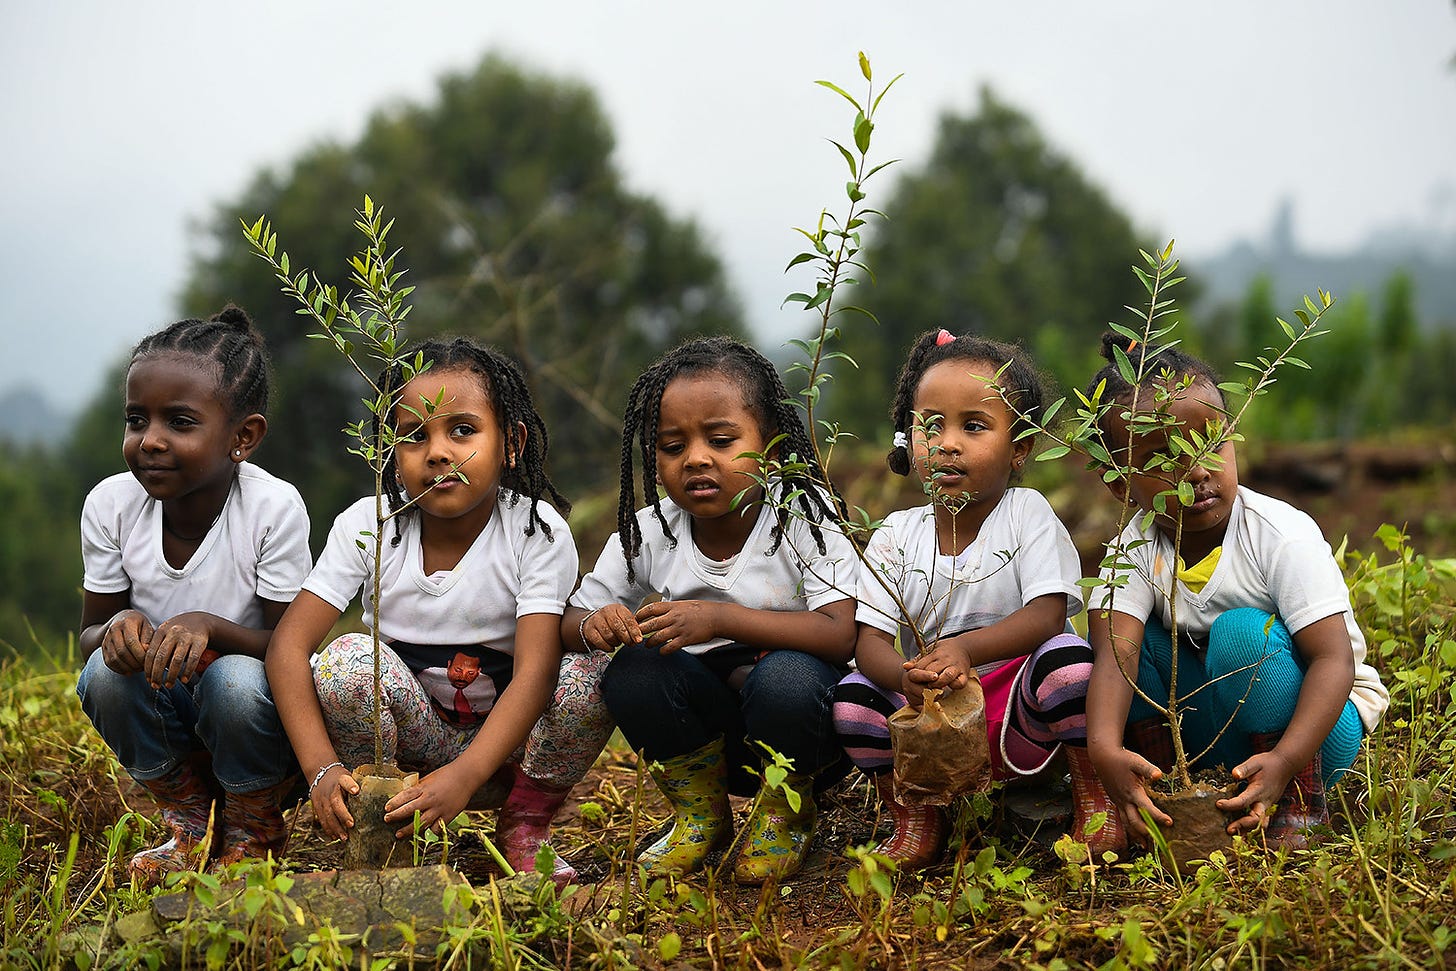 Ethiopian girls take part in a national tree-planting drive in the capital Addis Ababa on July 28. Ethiopia says it plans to plant 4 billion trees by October as part of a global movement to restore forests and help fight climate change. MICHAEL TEWELDE/AFP/Getty Images